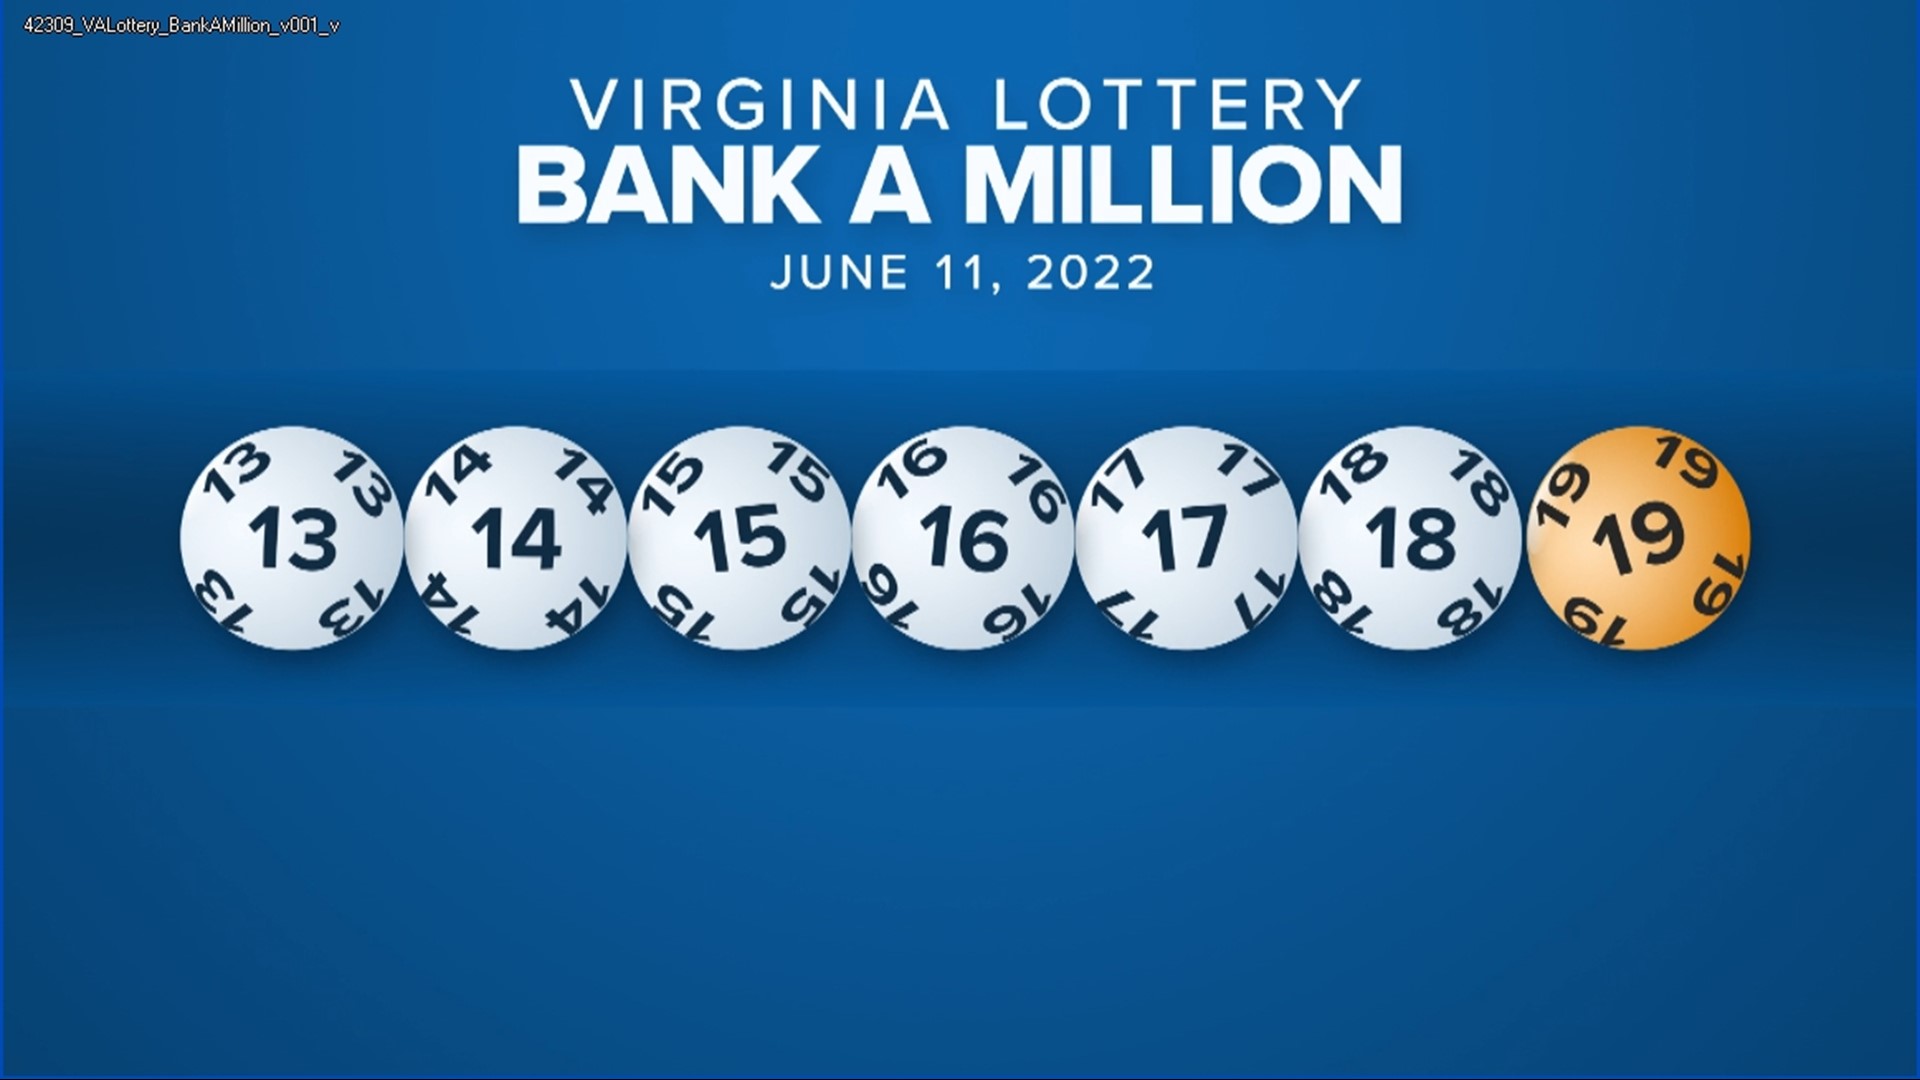 There was a 1 in 8.3 million chance for this sequence of numbers to appear for the Virginia lottery on Saturday.